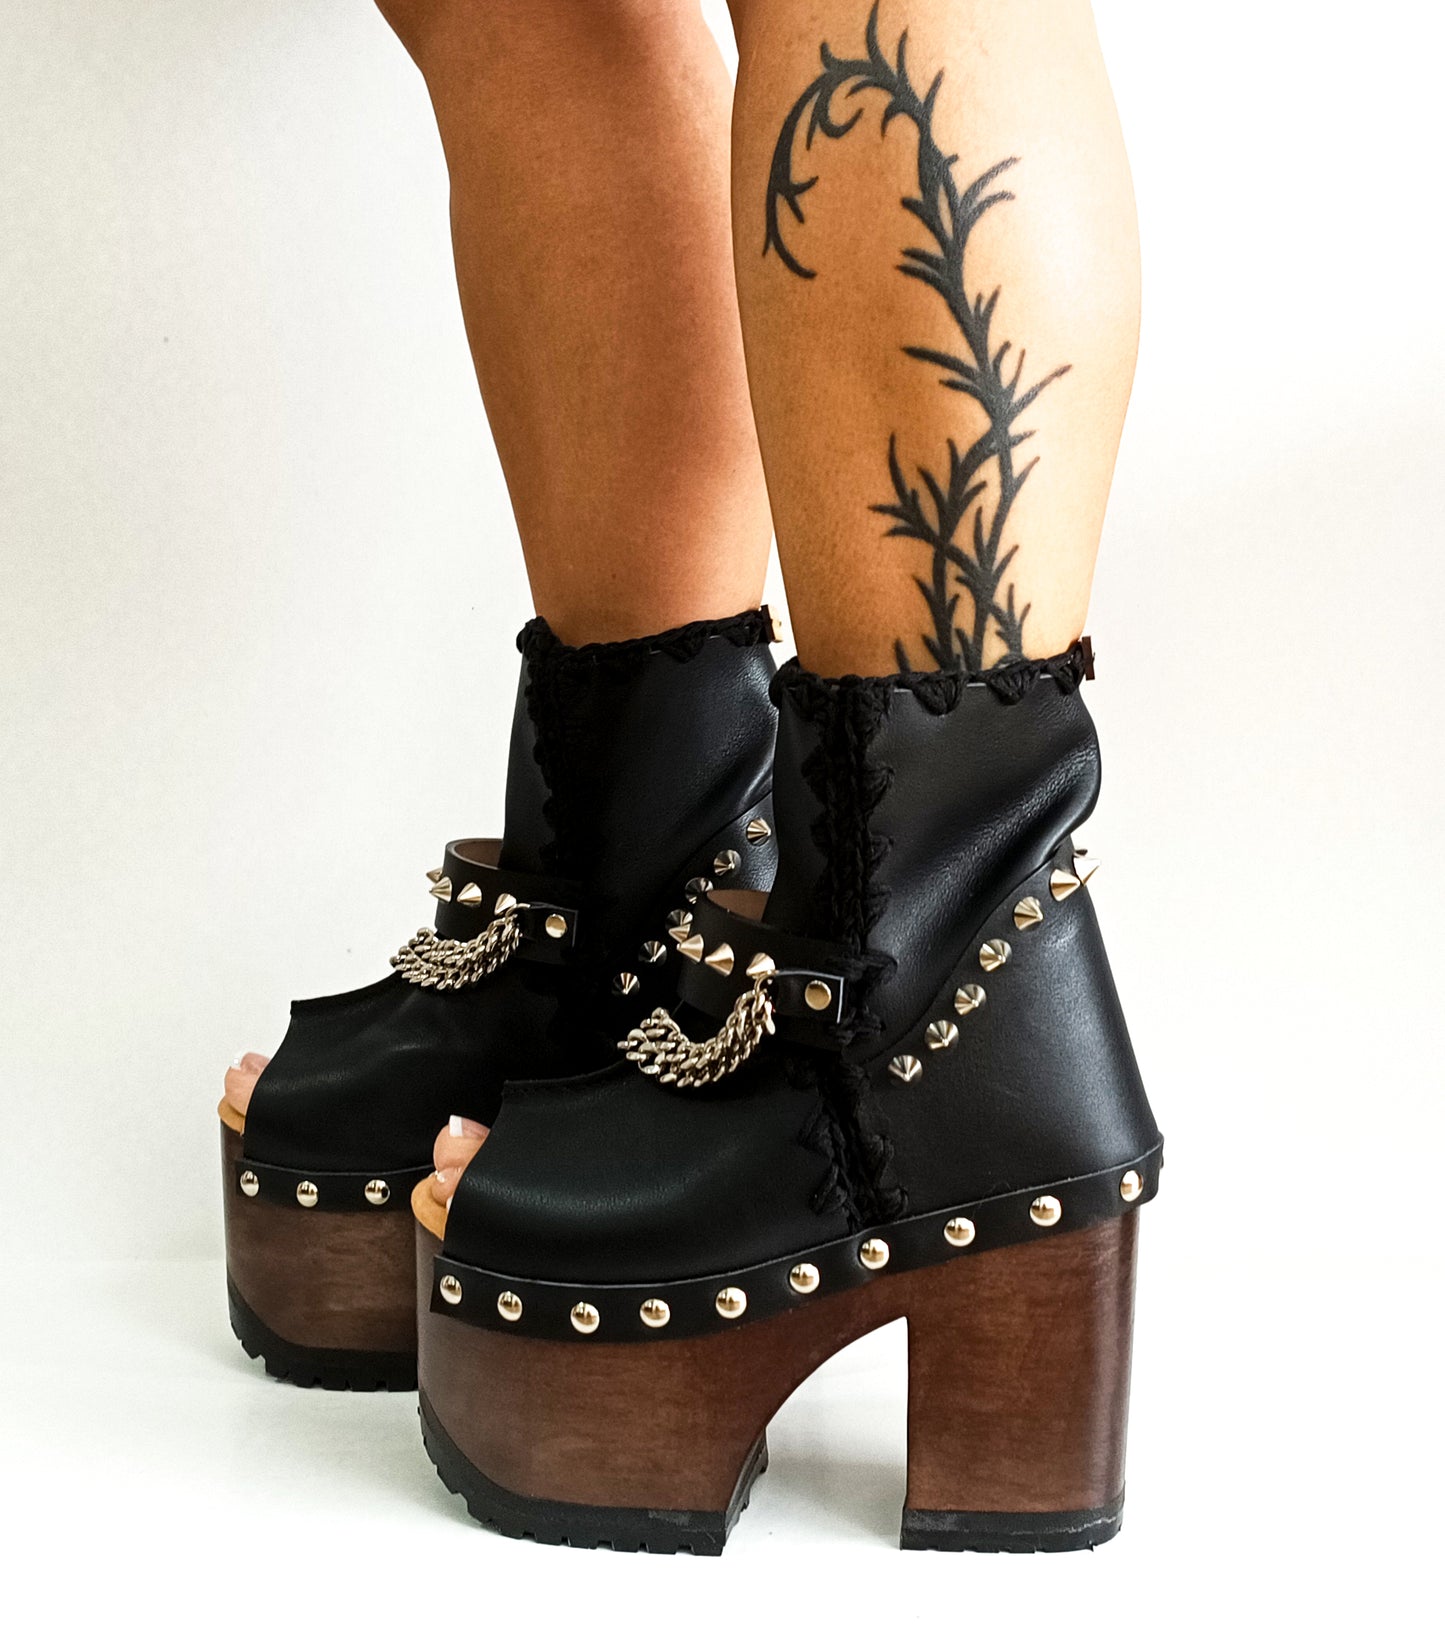 Black leather platform boot. Leather boot with super high wooden heel. Leather peep toe boot decorated with studs and silver chains. Platform boots with platform heel. Sizes 34 to 47. High quality leather shoes handmade by sol Caleyo. Sustainable fashion.